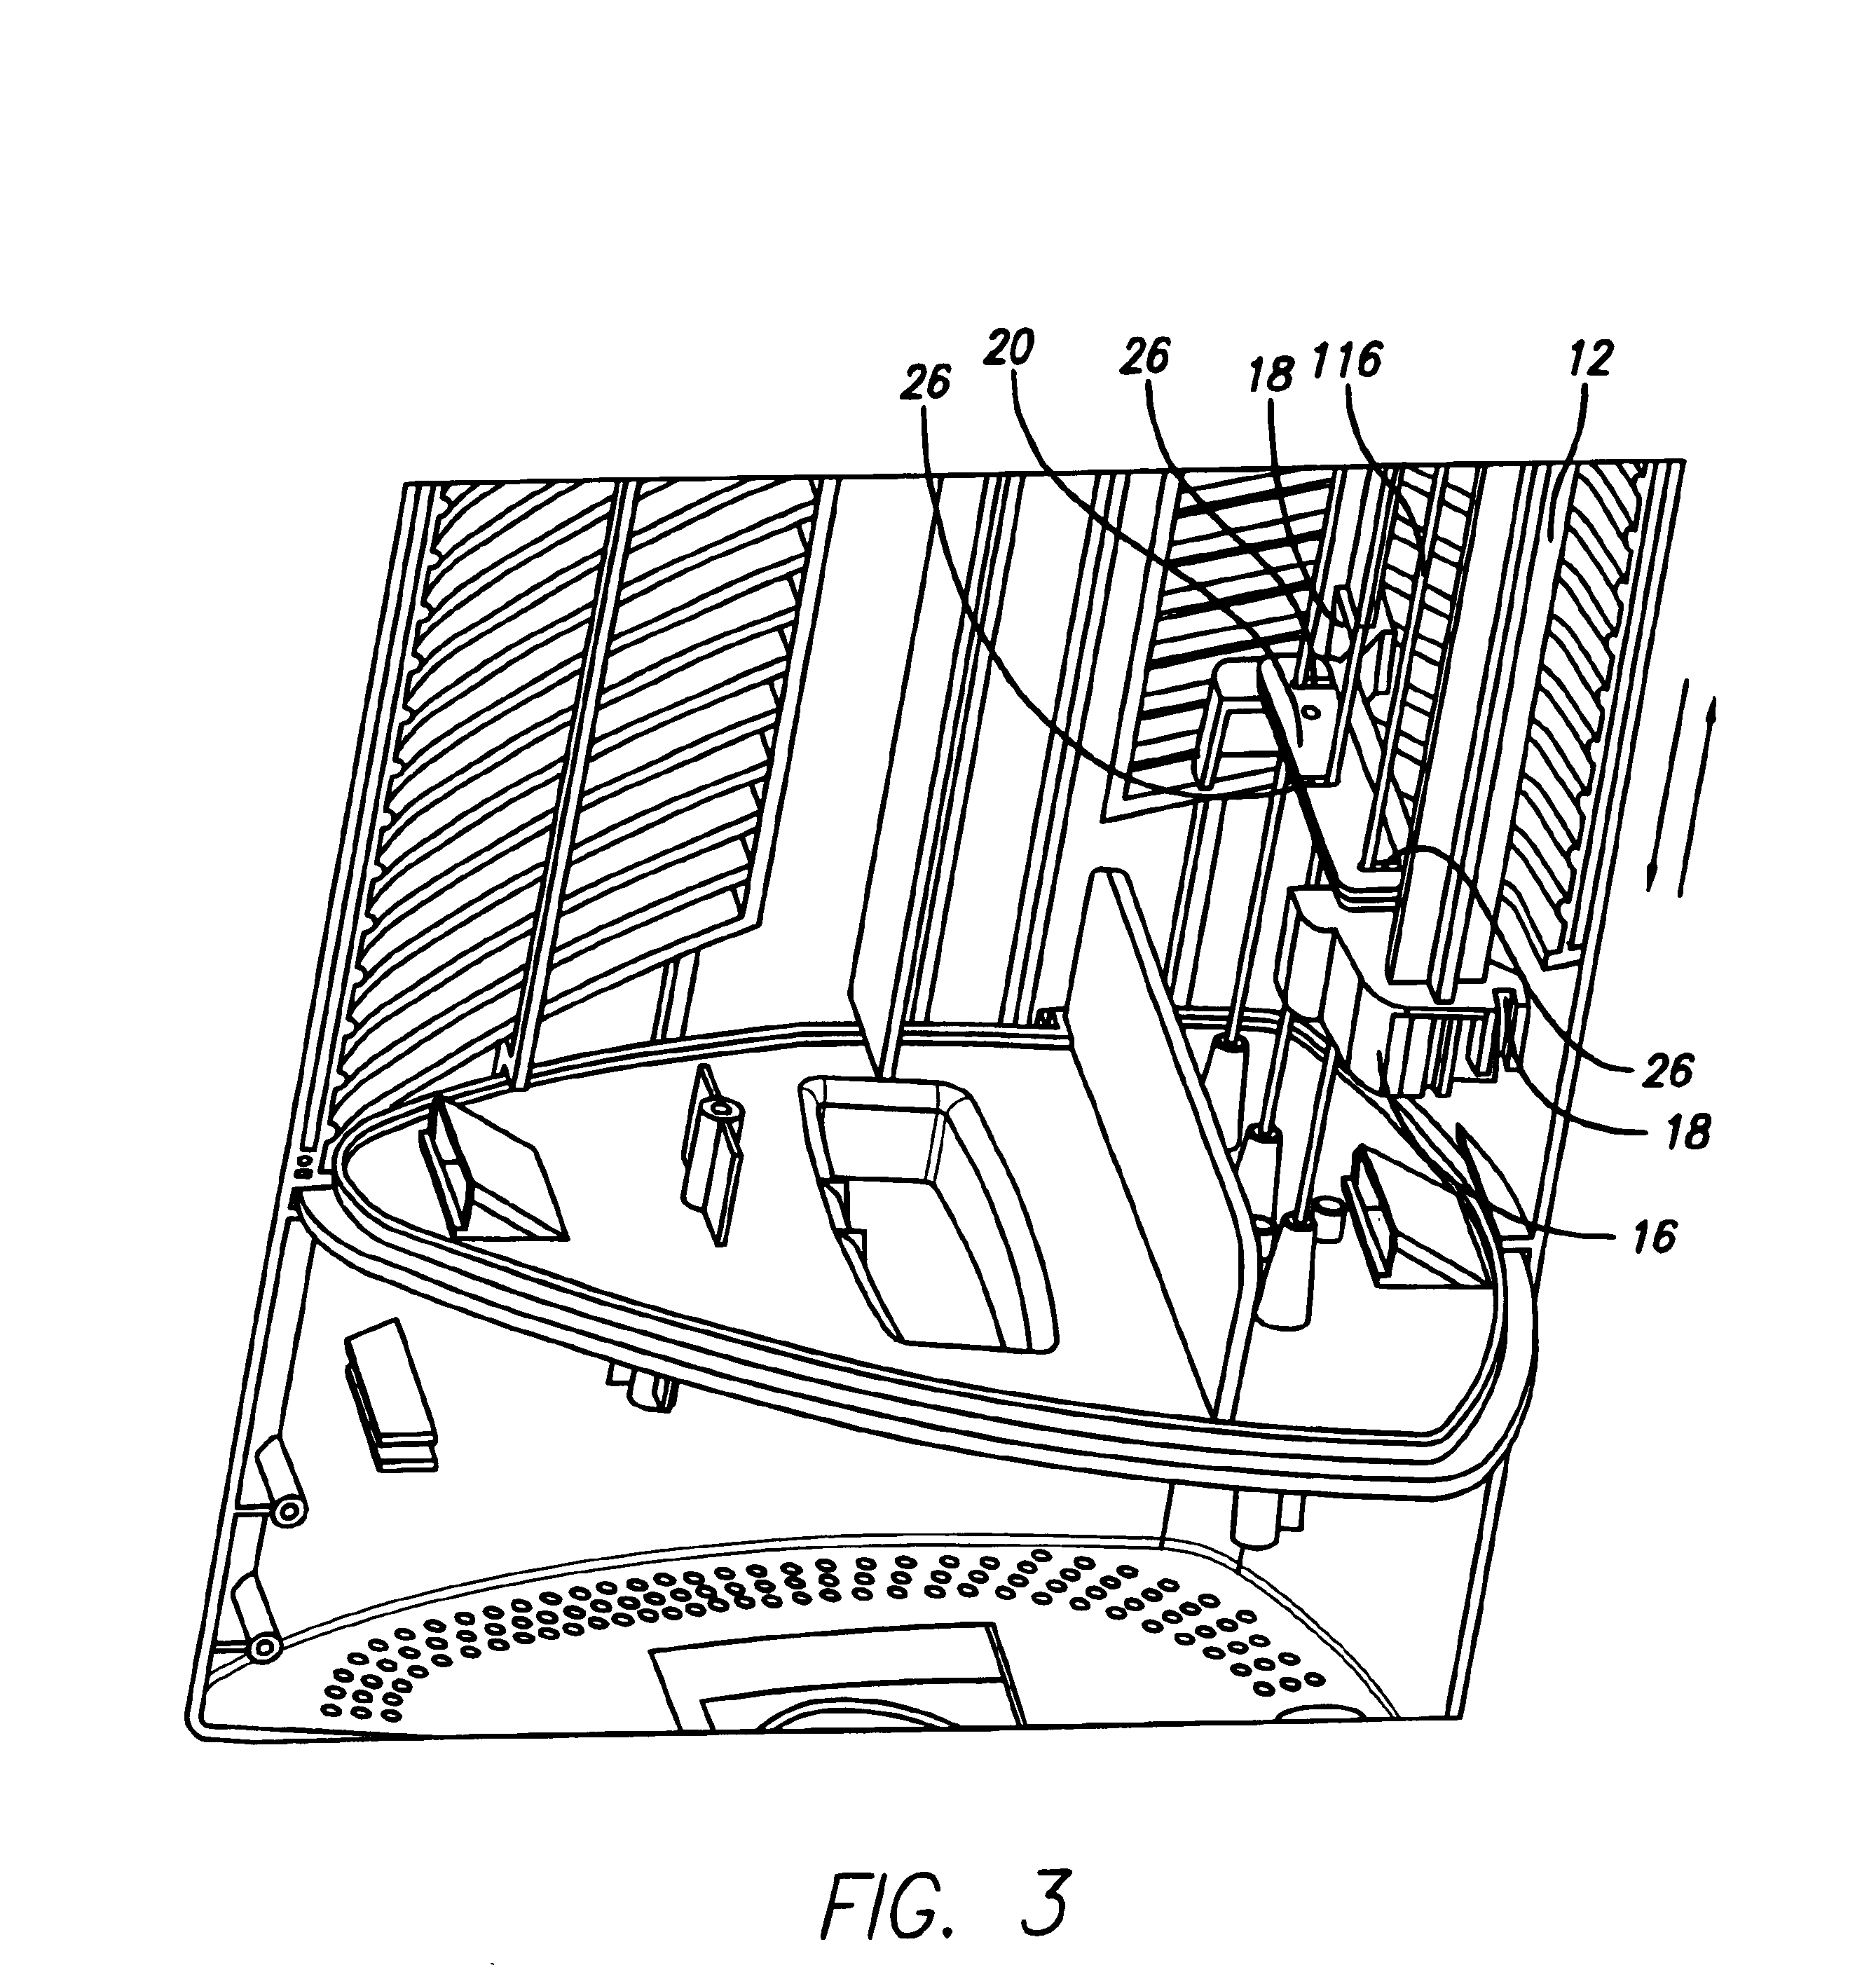 Cleaning mechanism for ion emitting air conditioning device